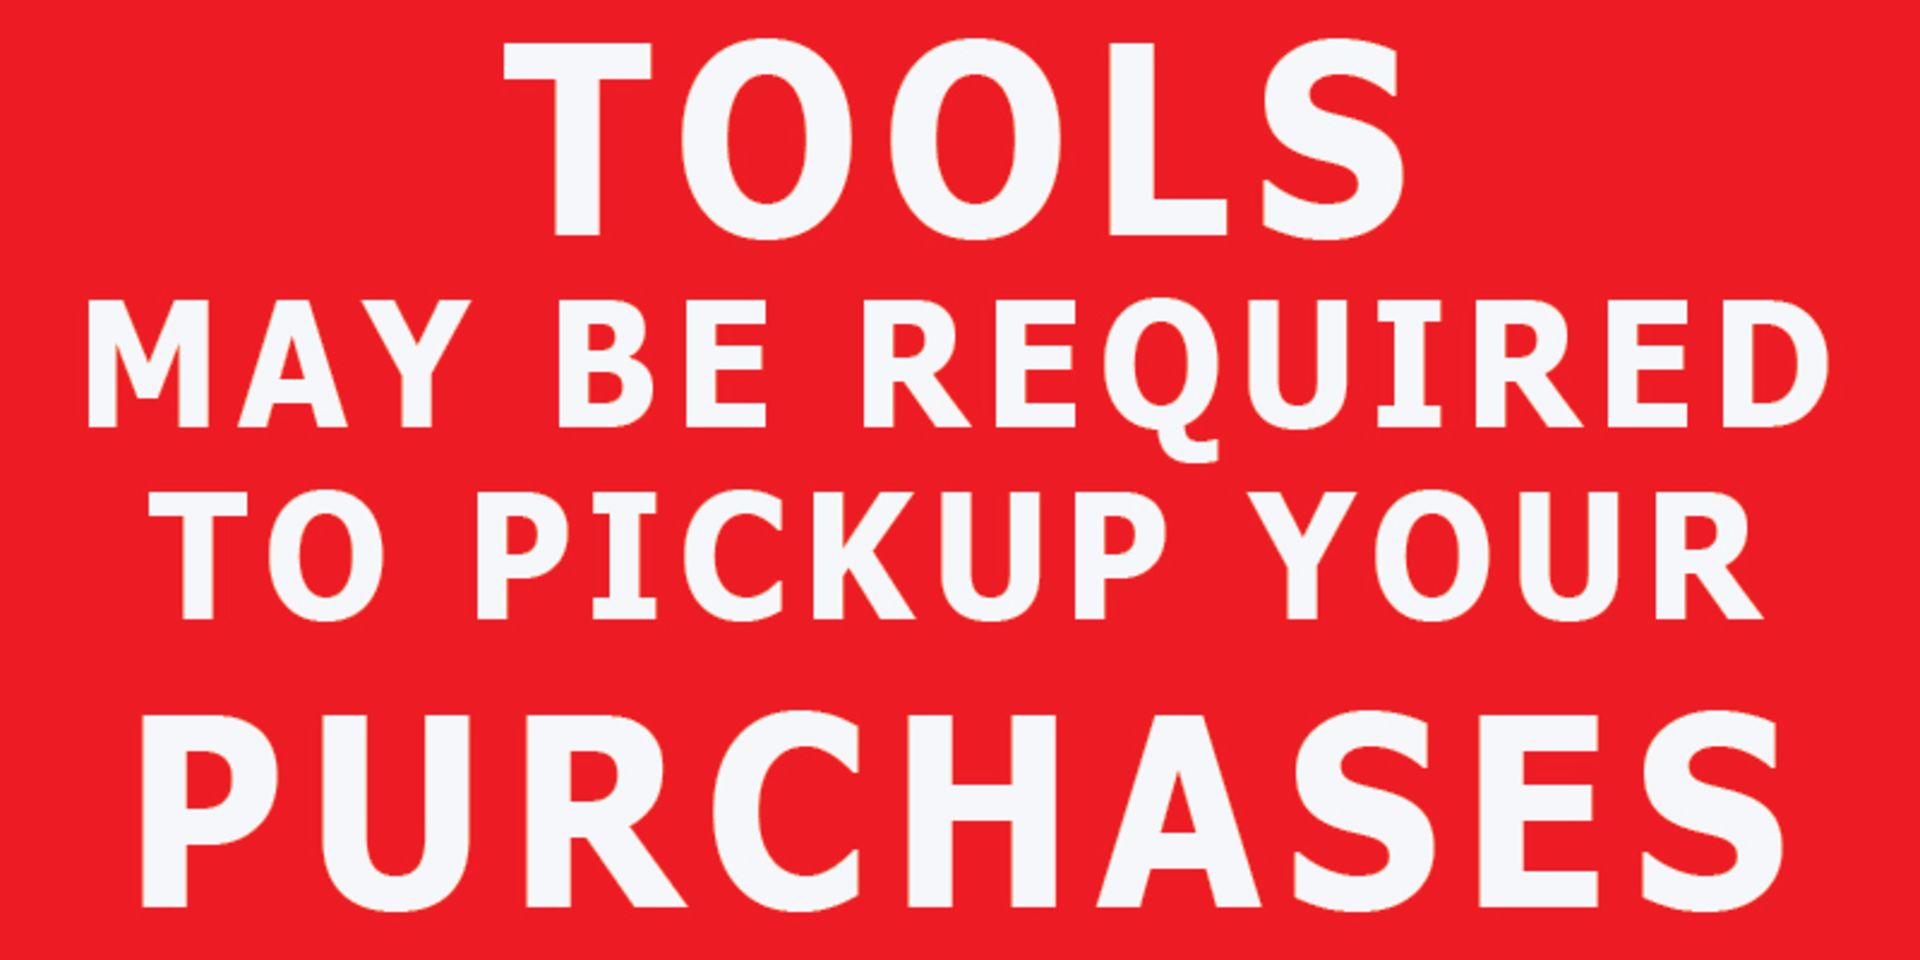 You May Need Tools To Pickup Your Items.